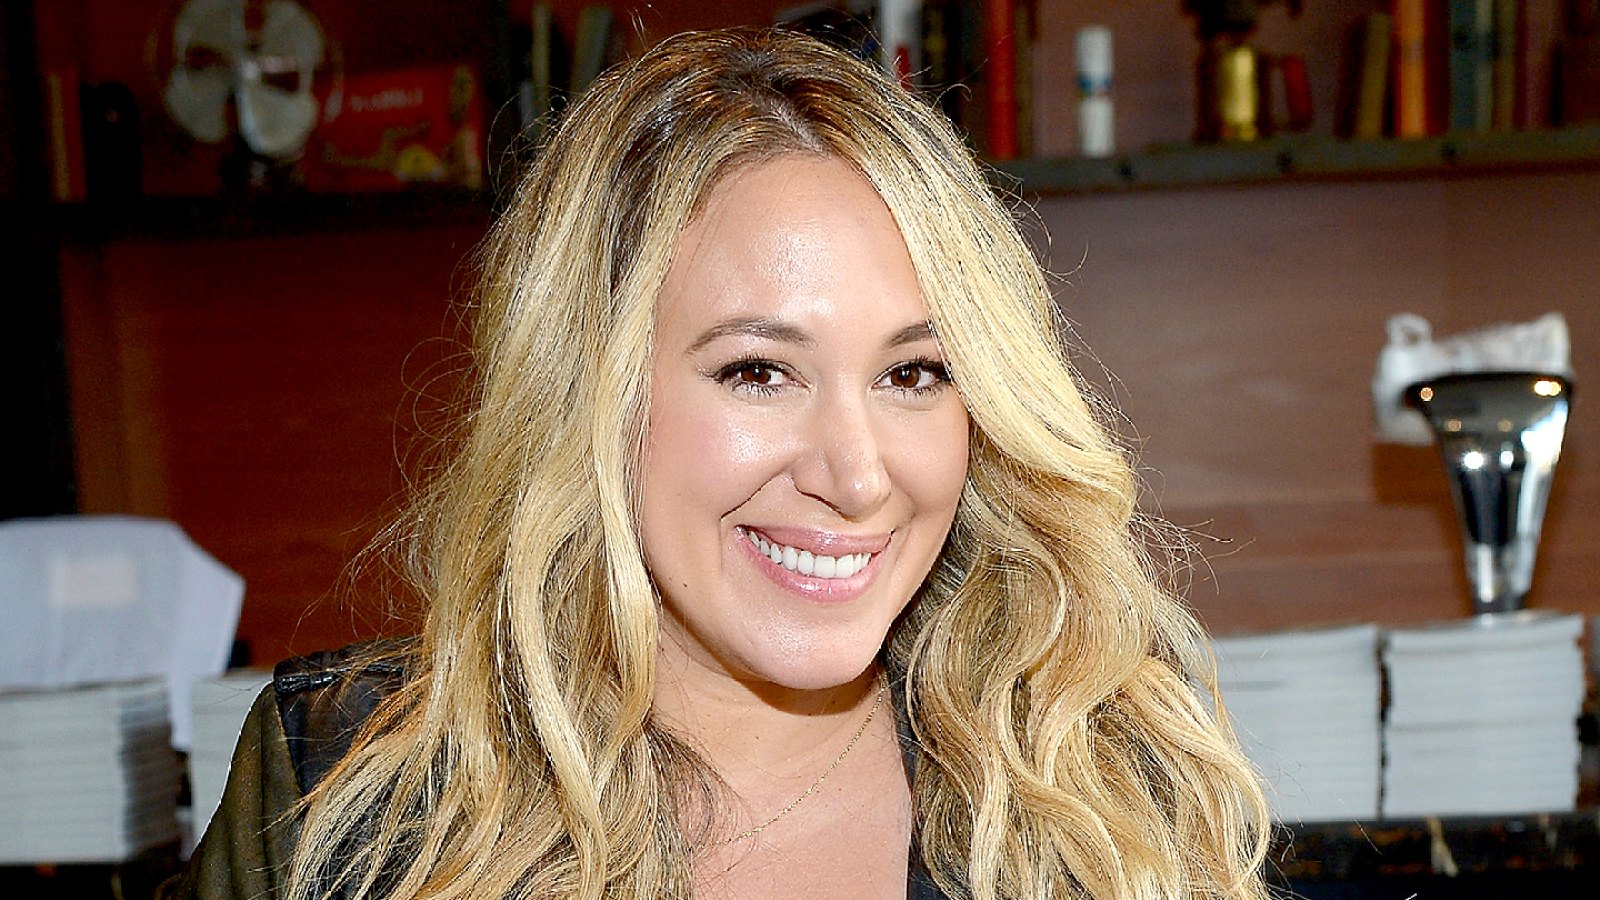 Haylie Duff poses at Veg Out: Stretch, Sip And Savor Presented By Hungryroot Hosted By Haylie Duff during Food Network & Cooking Channel New York City Wine & Food Festival.